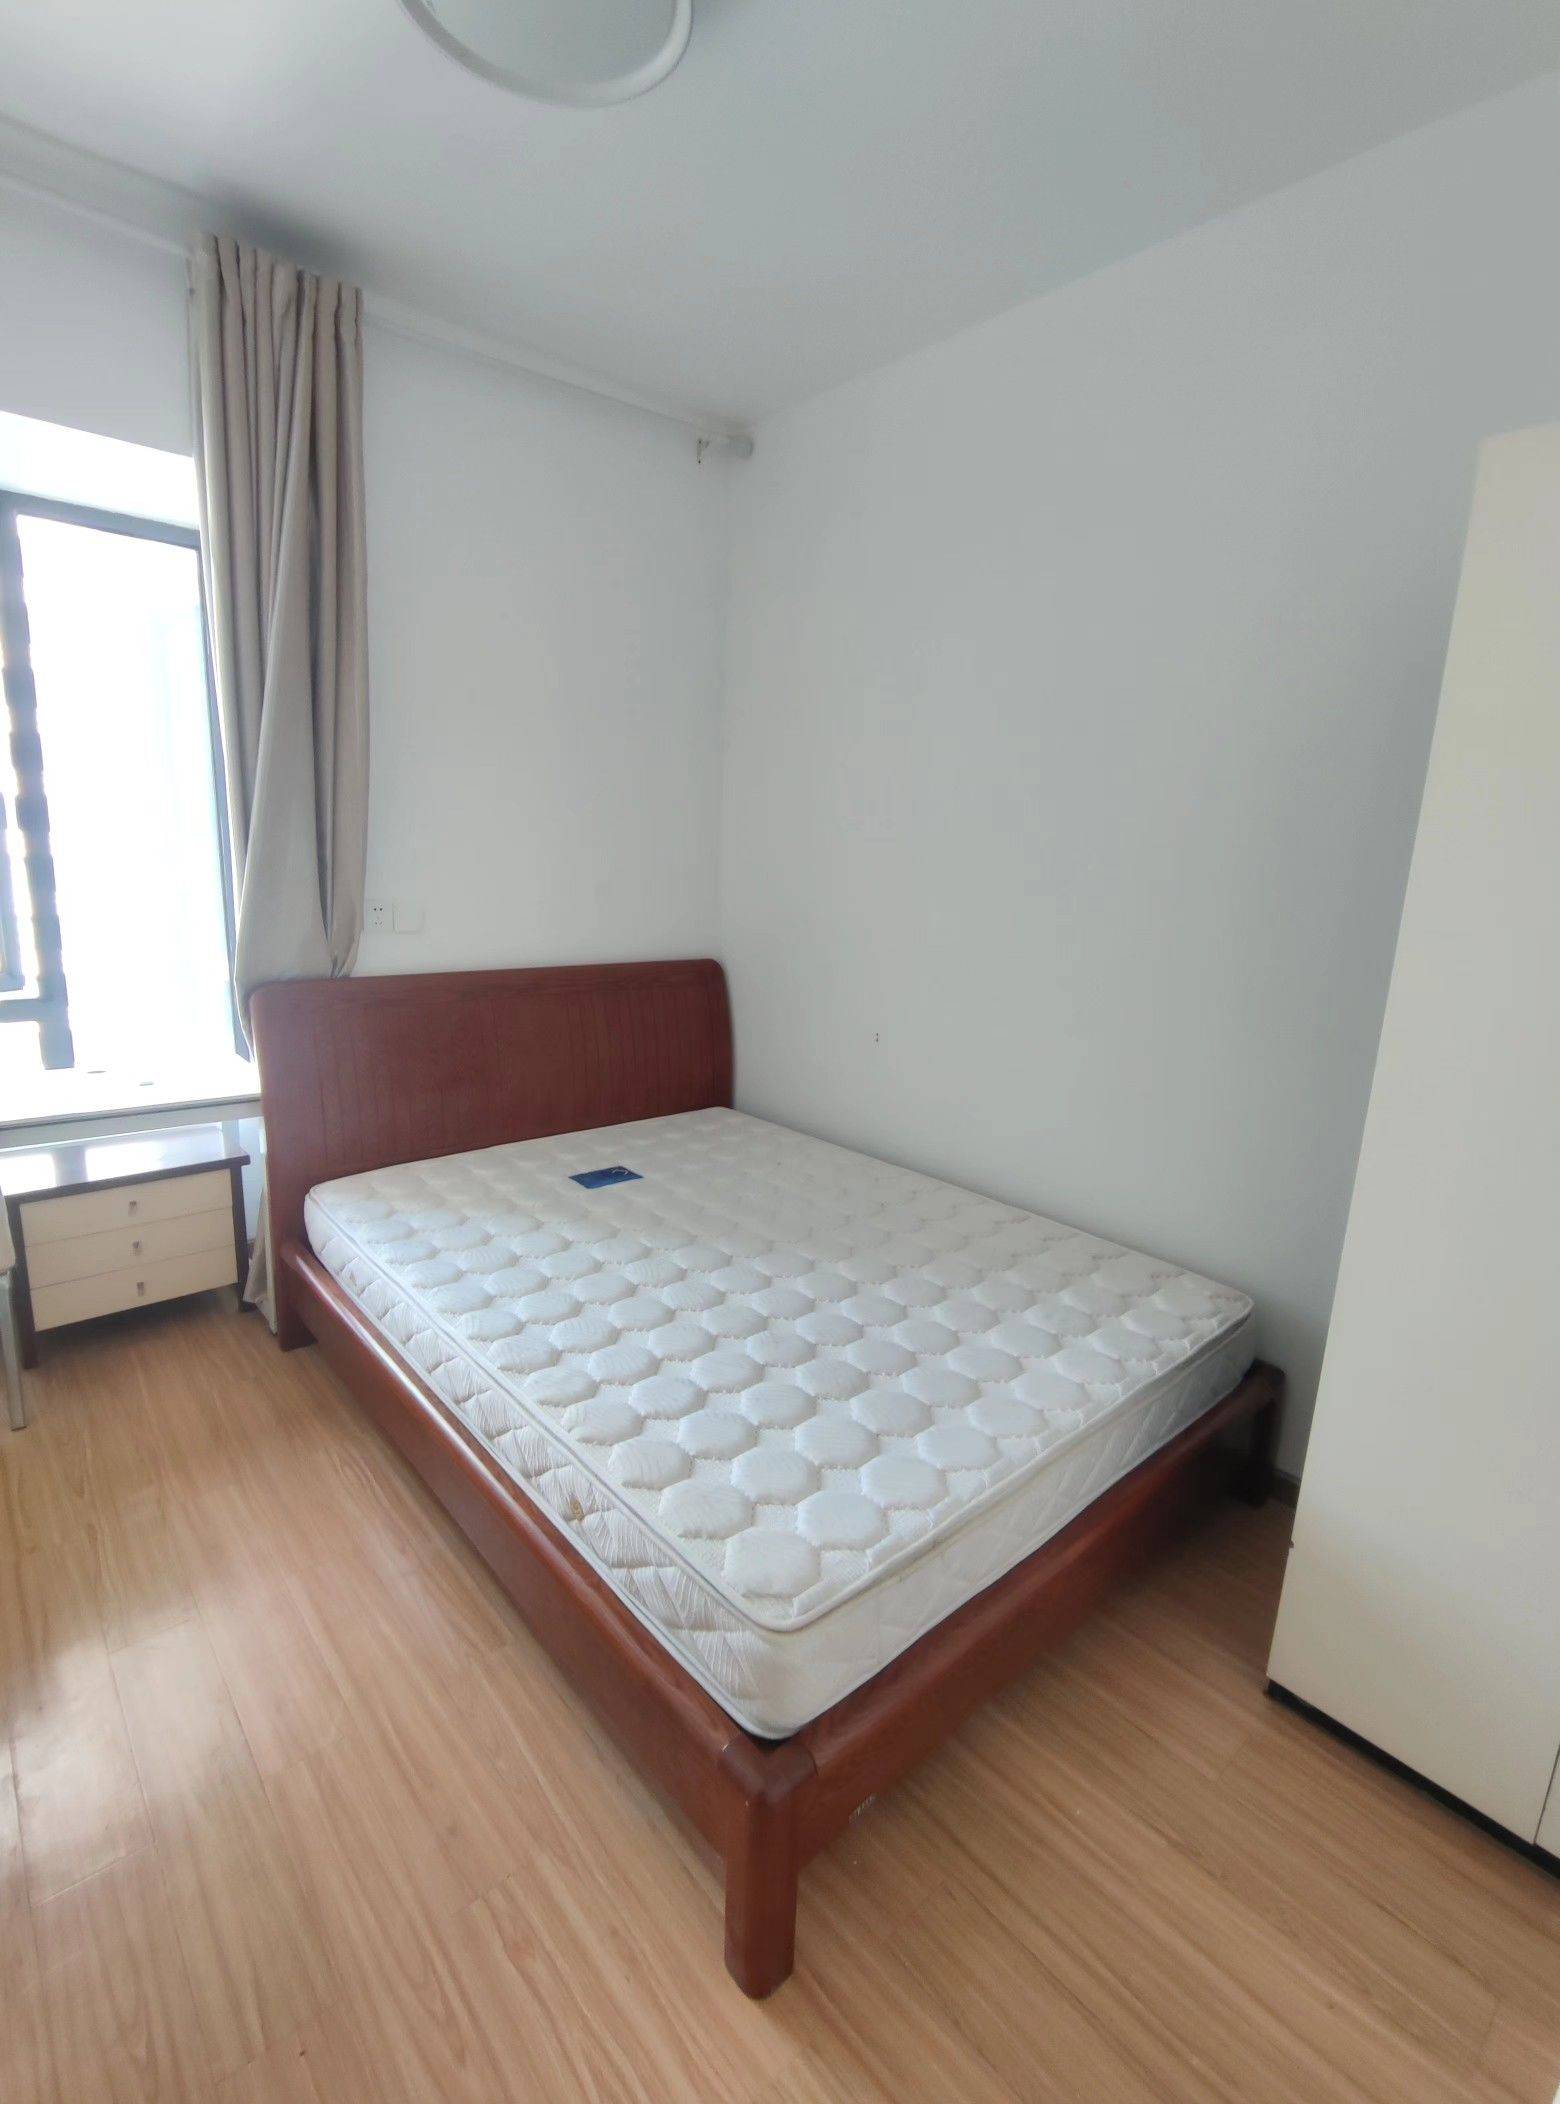 Wuhan-Jianghan-Cozy Home,Clean&Comfy,No Gender Limit